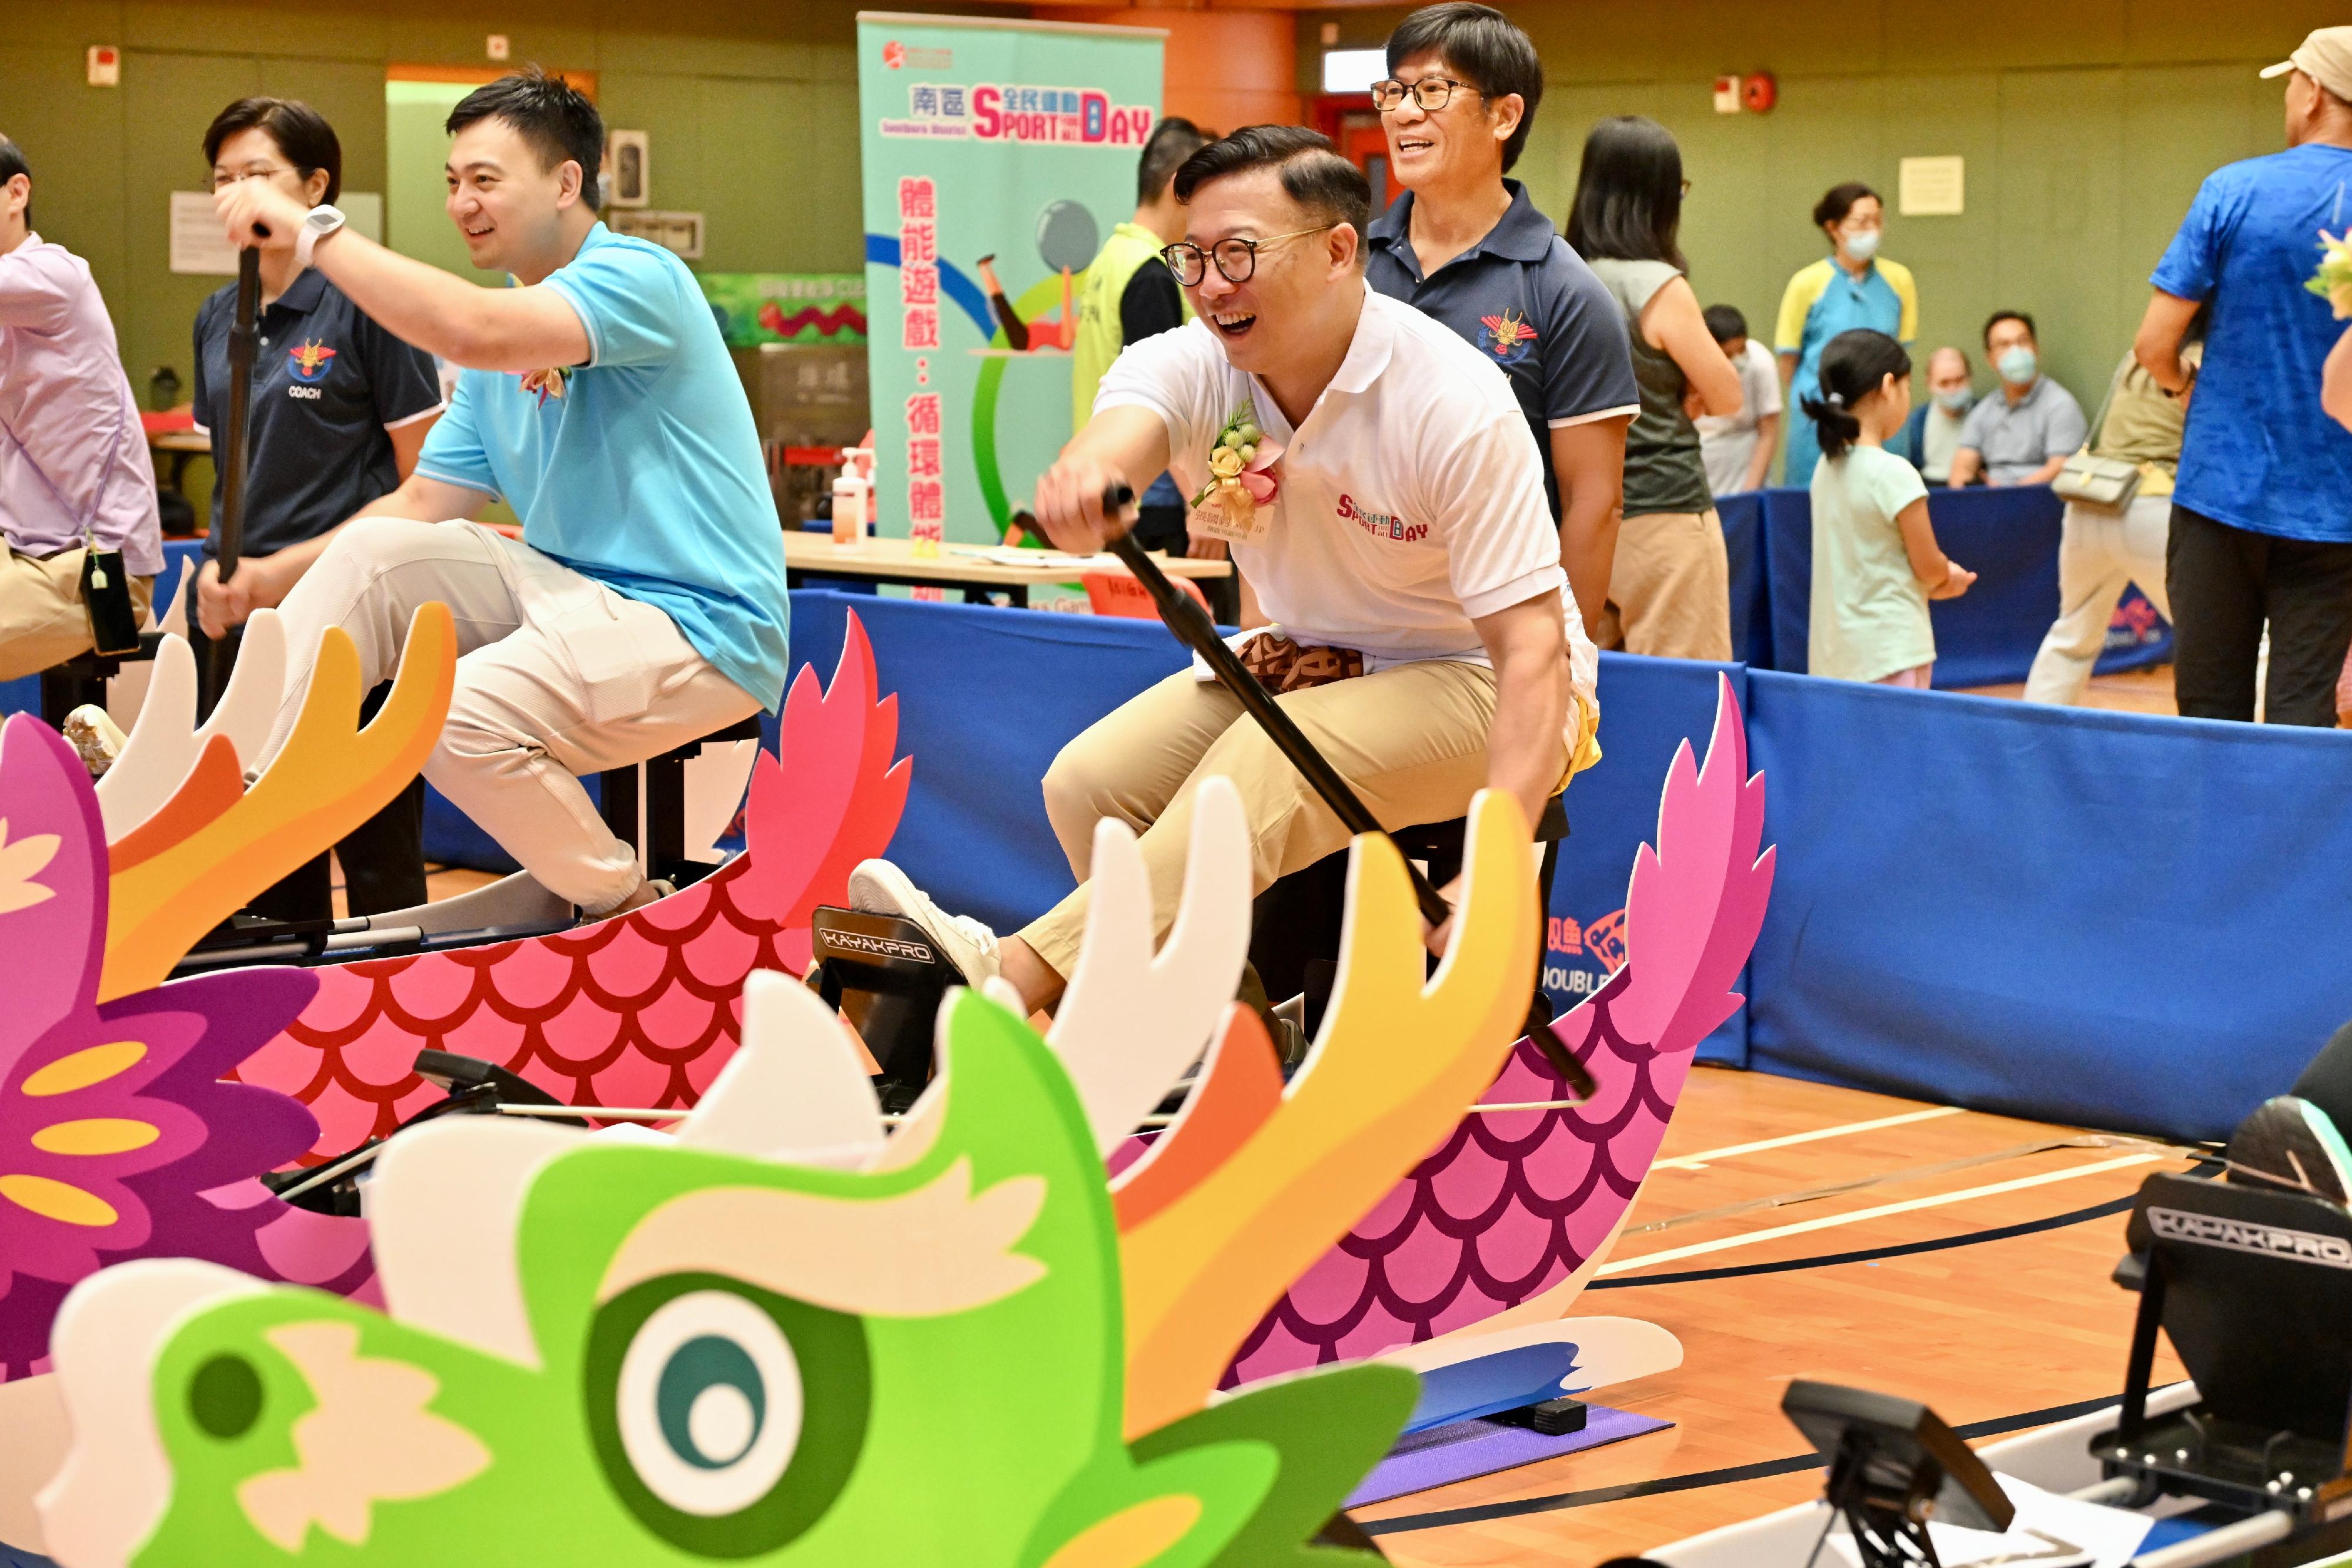 The Deputy Secretary for Justice, Mr Cheung Kwok-kwan, today (August 6) participated in the Sport For All Day 2023 to promote the benefits of exercise for a healthy body and mind lifestyle. Photo shows Mr Cheung (right) joining the dragon boating play-in session at the Aberdeen Sports Center.